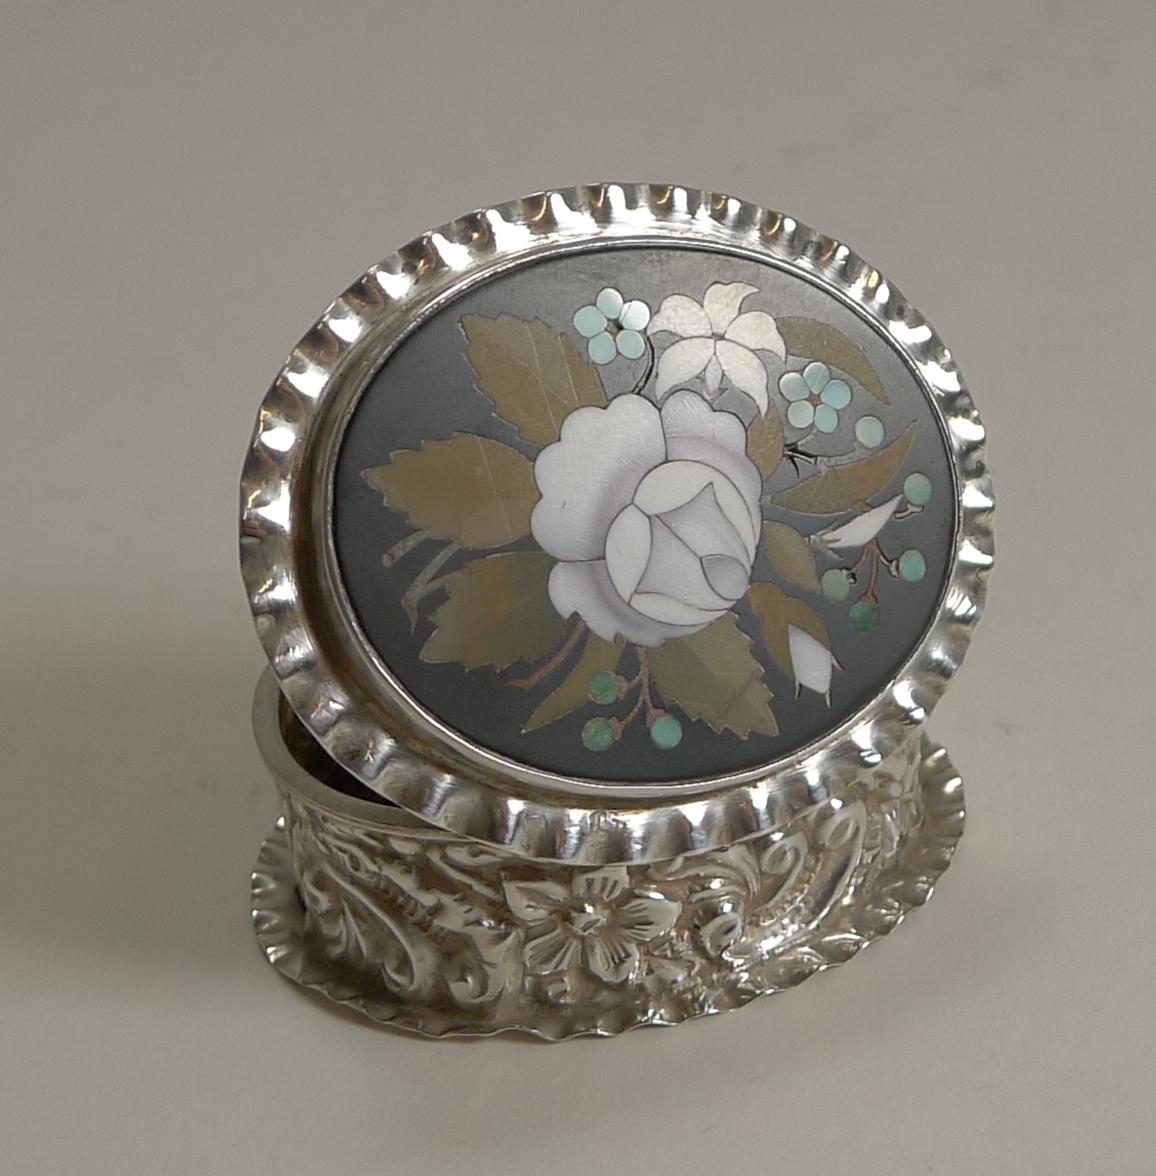 Early 20th Century English Sterling Silver Pill Box Inlaid With Italian Pietra Dura, 1900